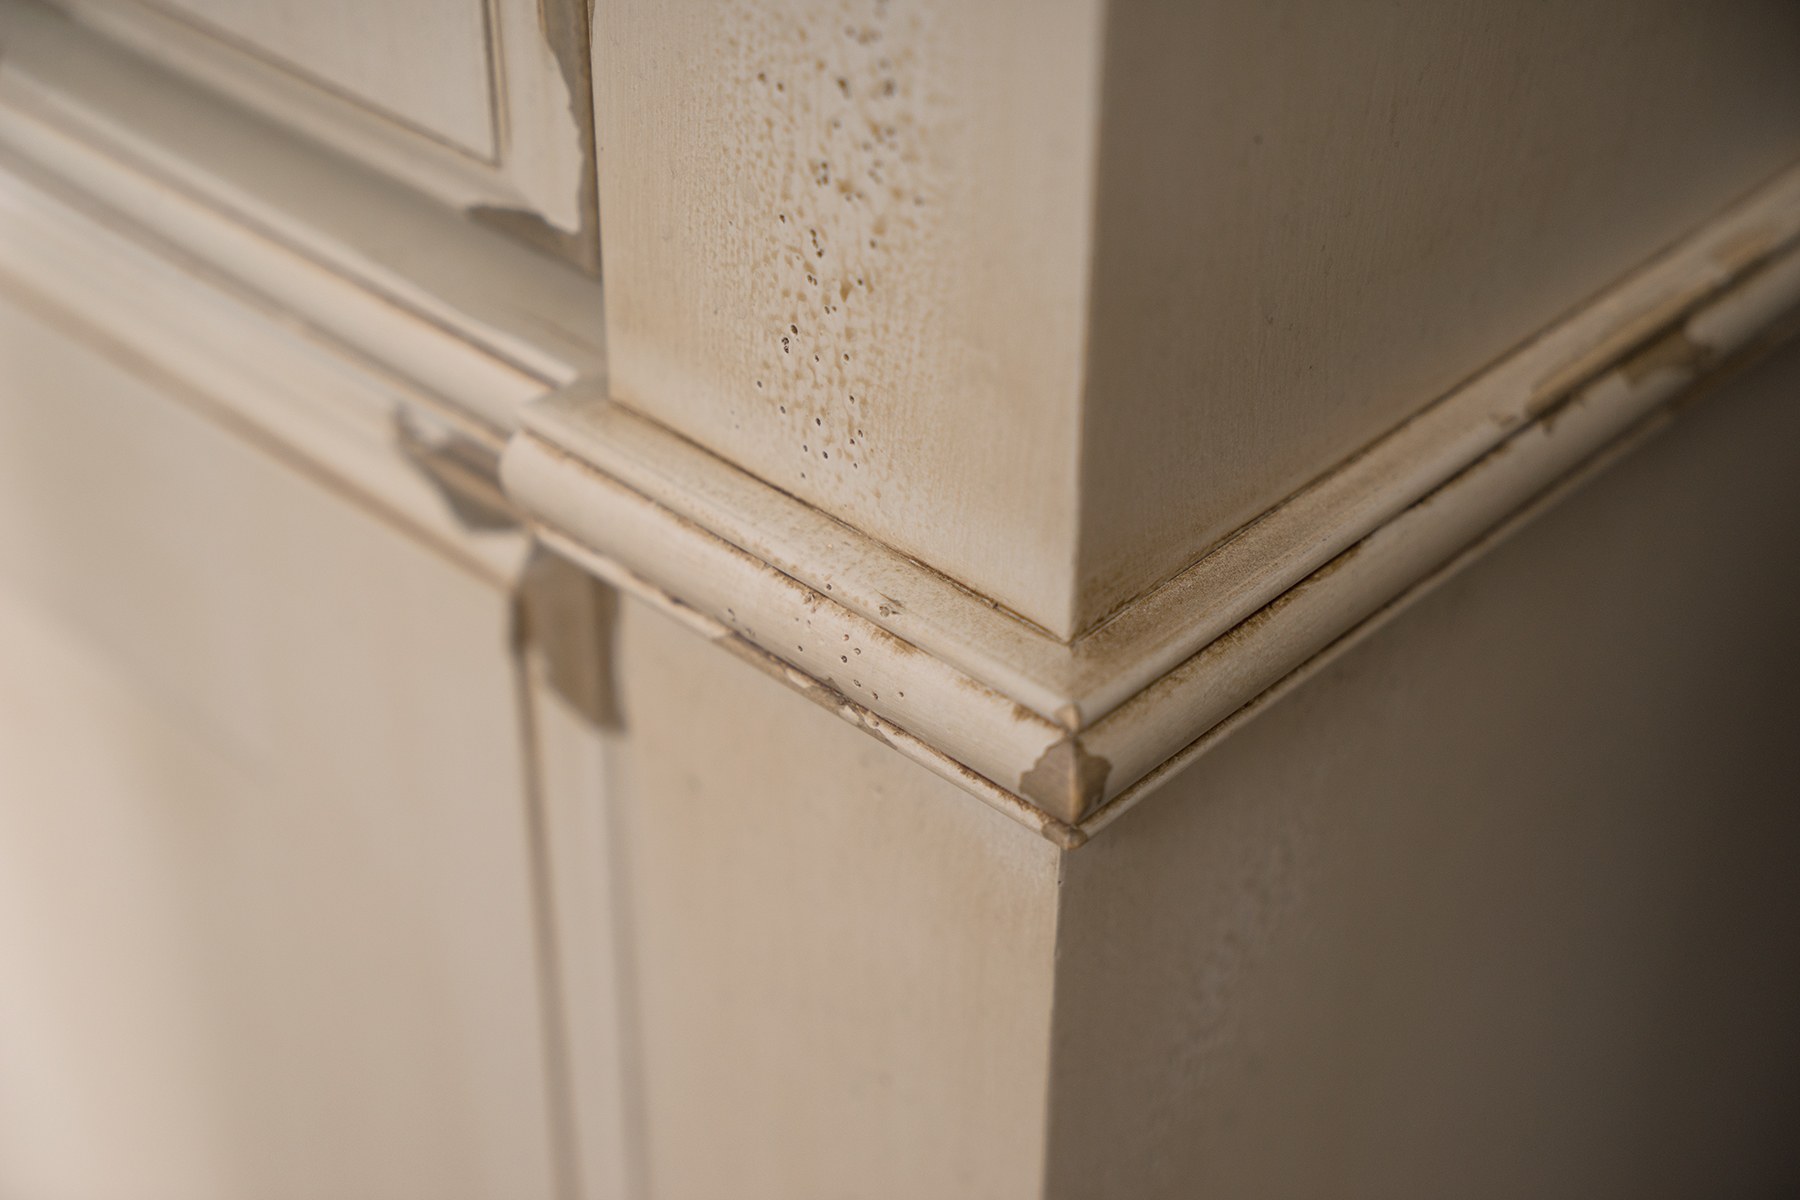 A close up of the molding details on the corner of a furniture styled vanity.